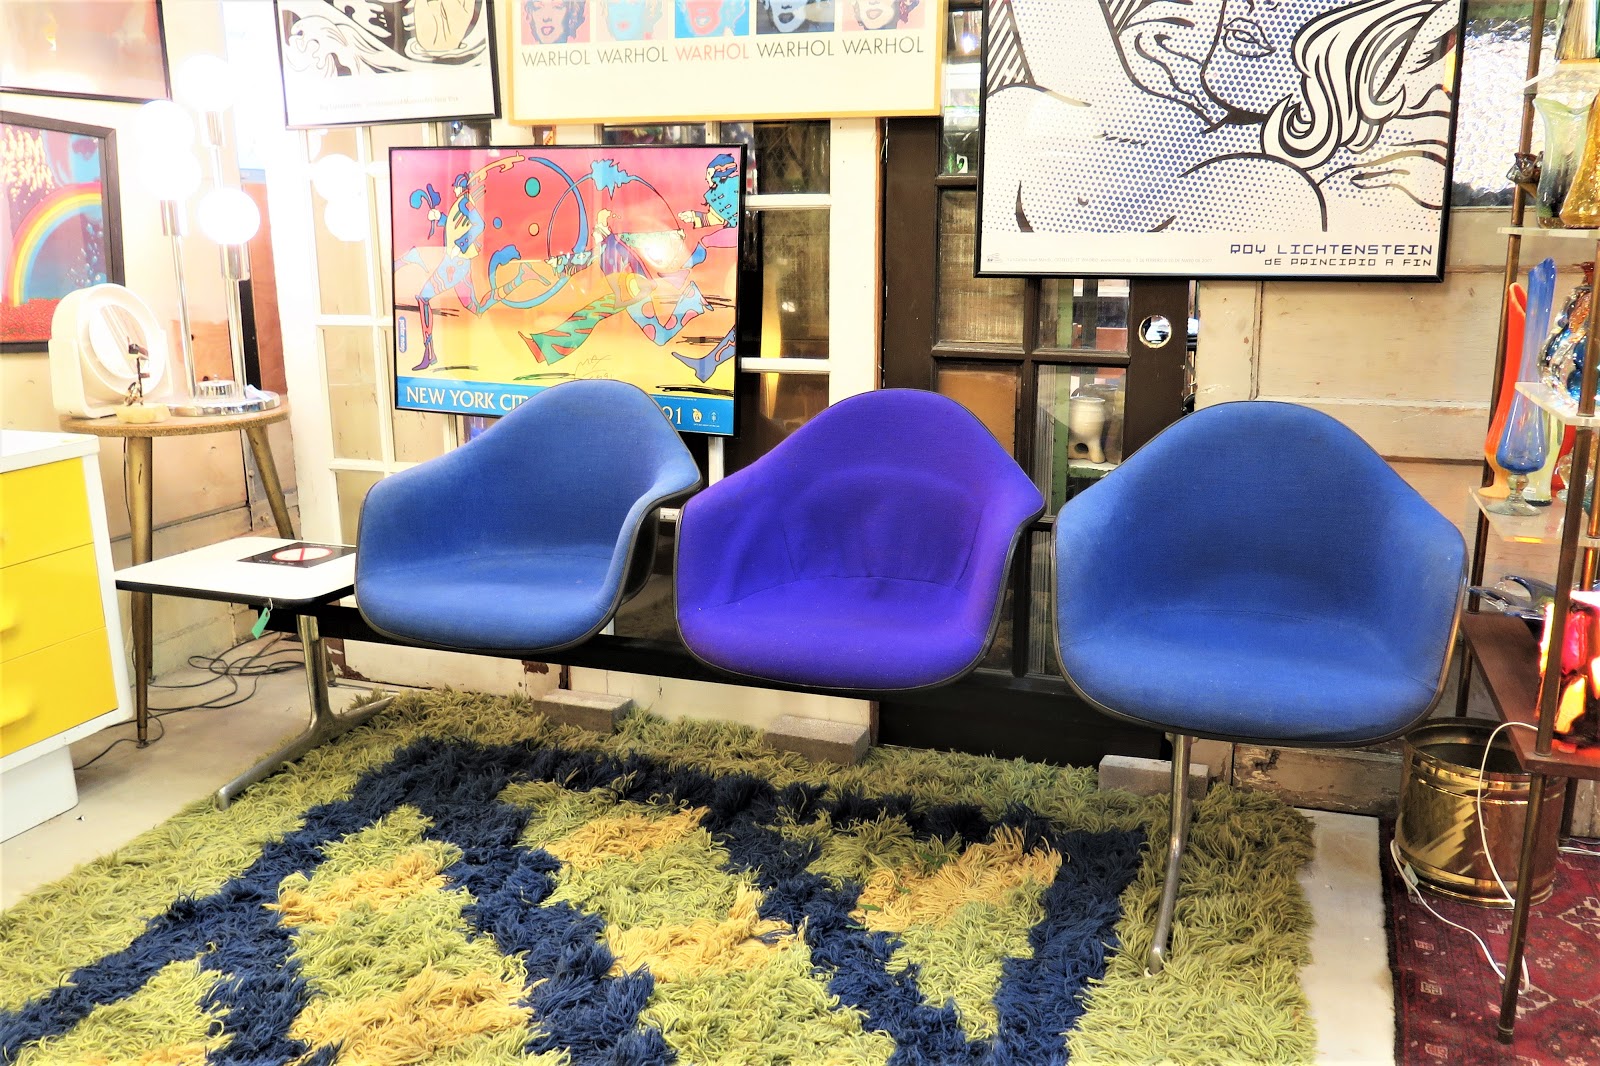 WANT ANTIQUE inc.: 新入荷！Eames Chairs【LIFE STORE】